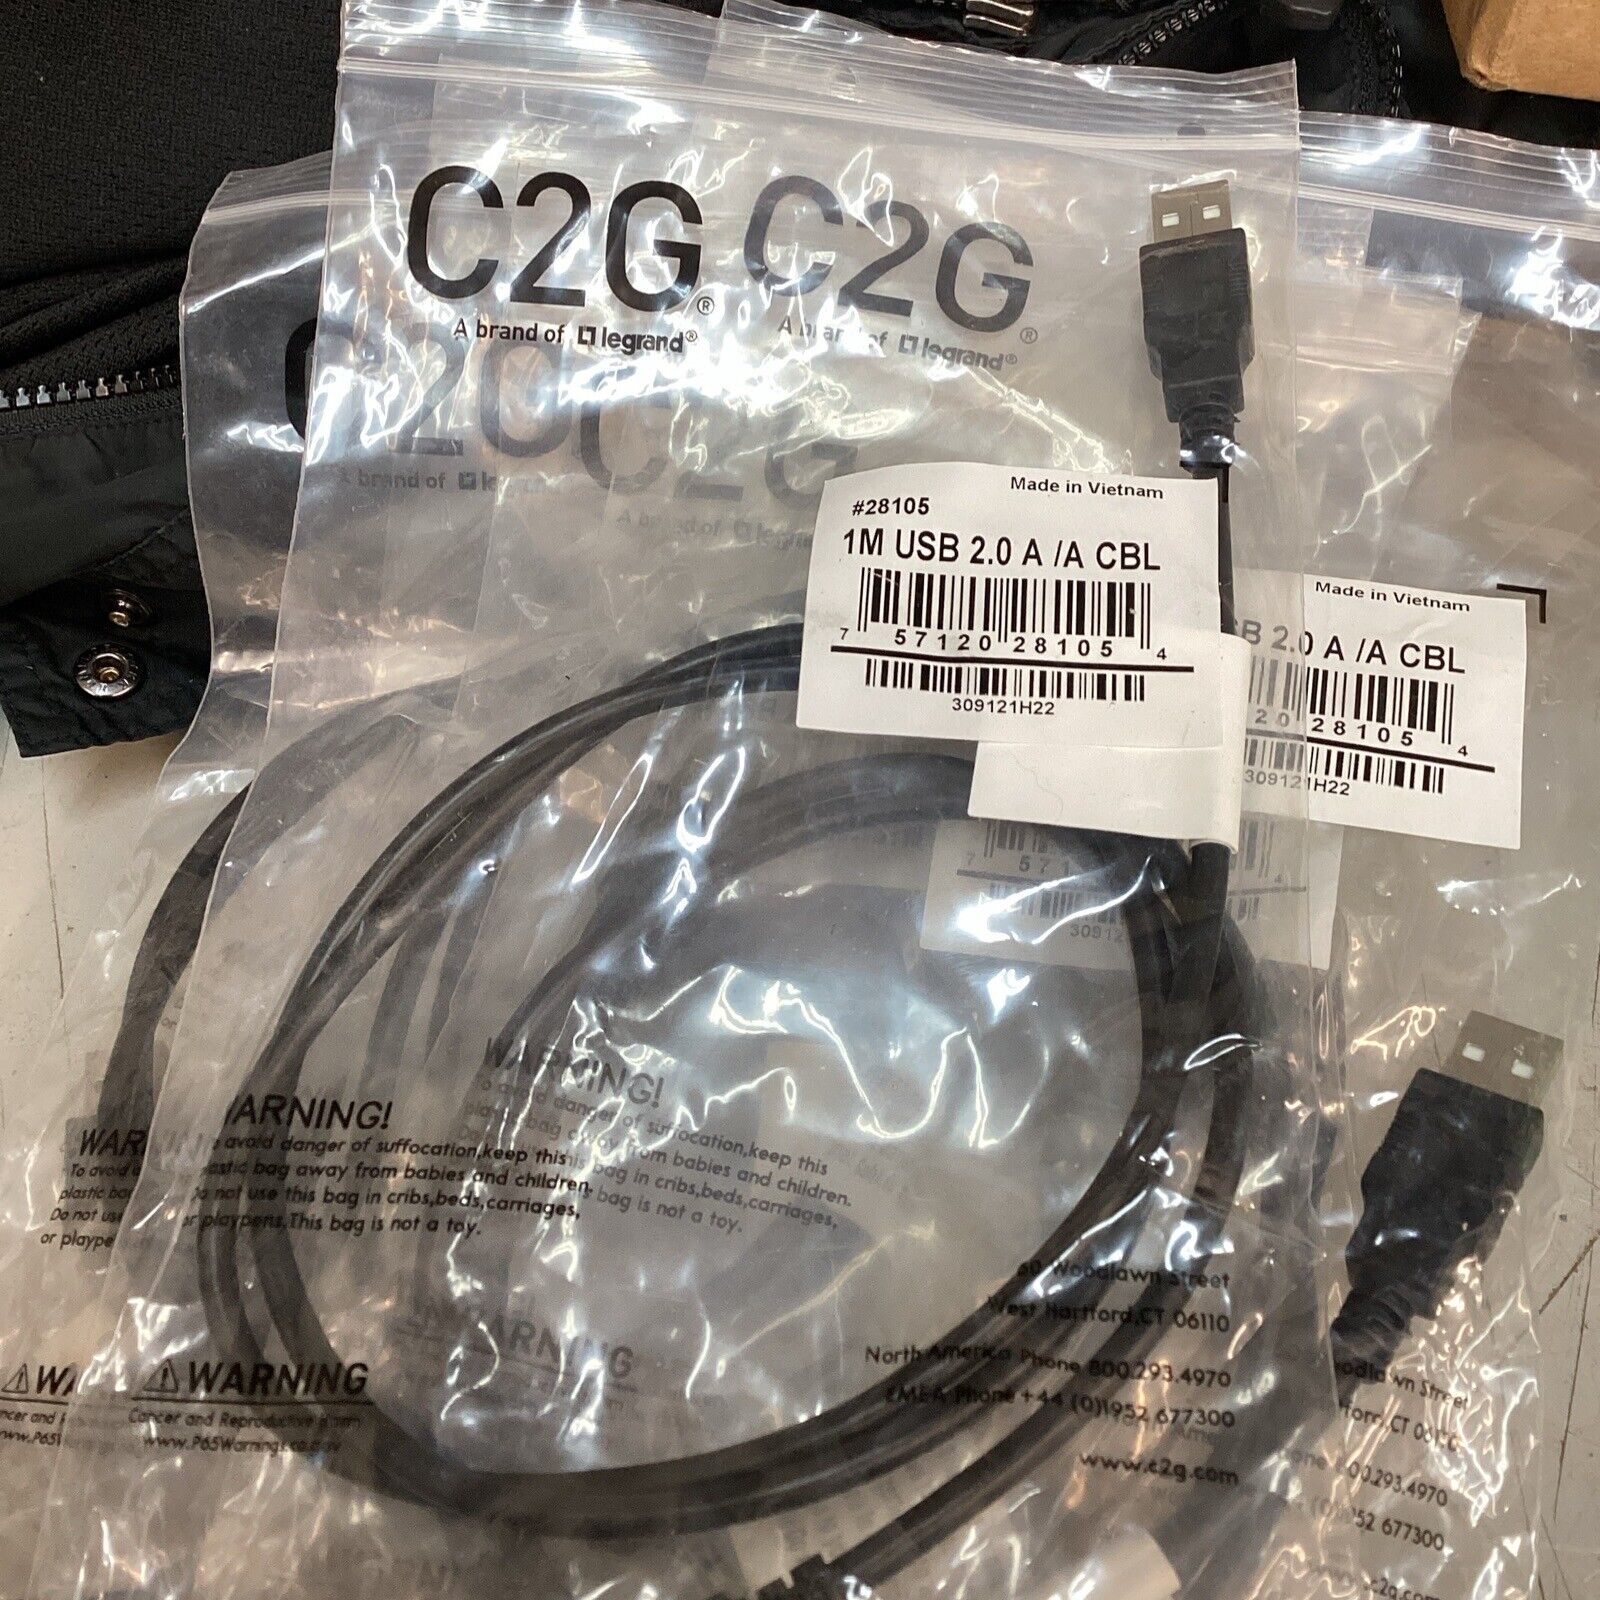 C2G 28105 USB Cable - USB 2.0 A Male to A Male Cable, Black (3.3 Feet, 1 Meter)